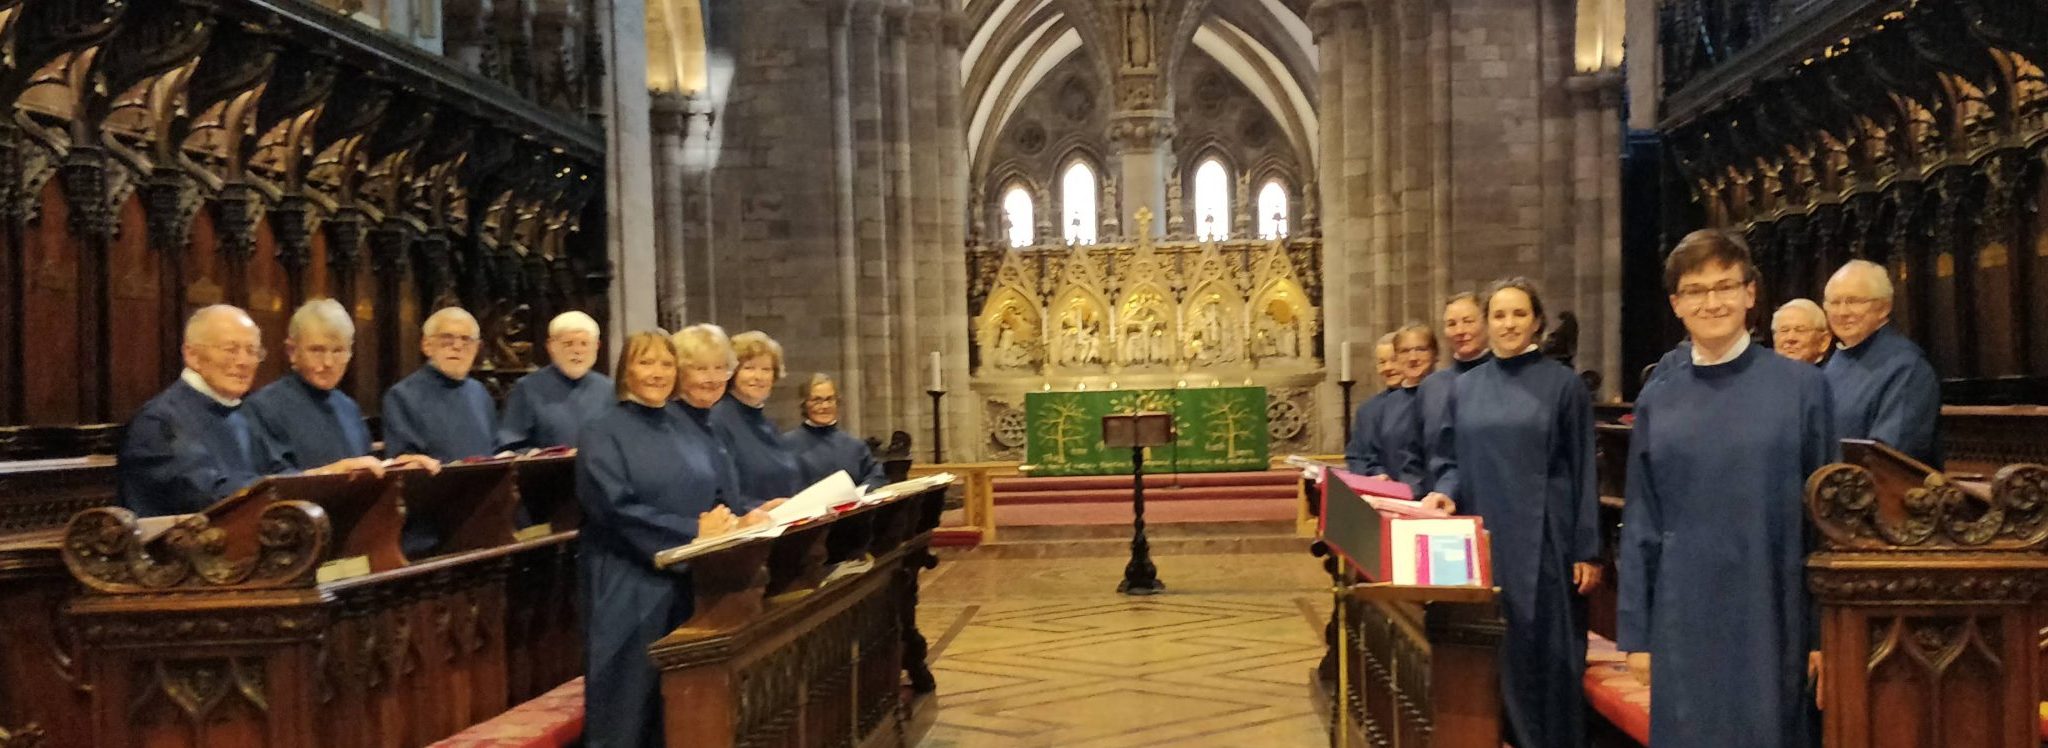 Happy (but hot!) memories of our summer residency at Hereford Cathedral